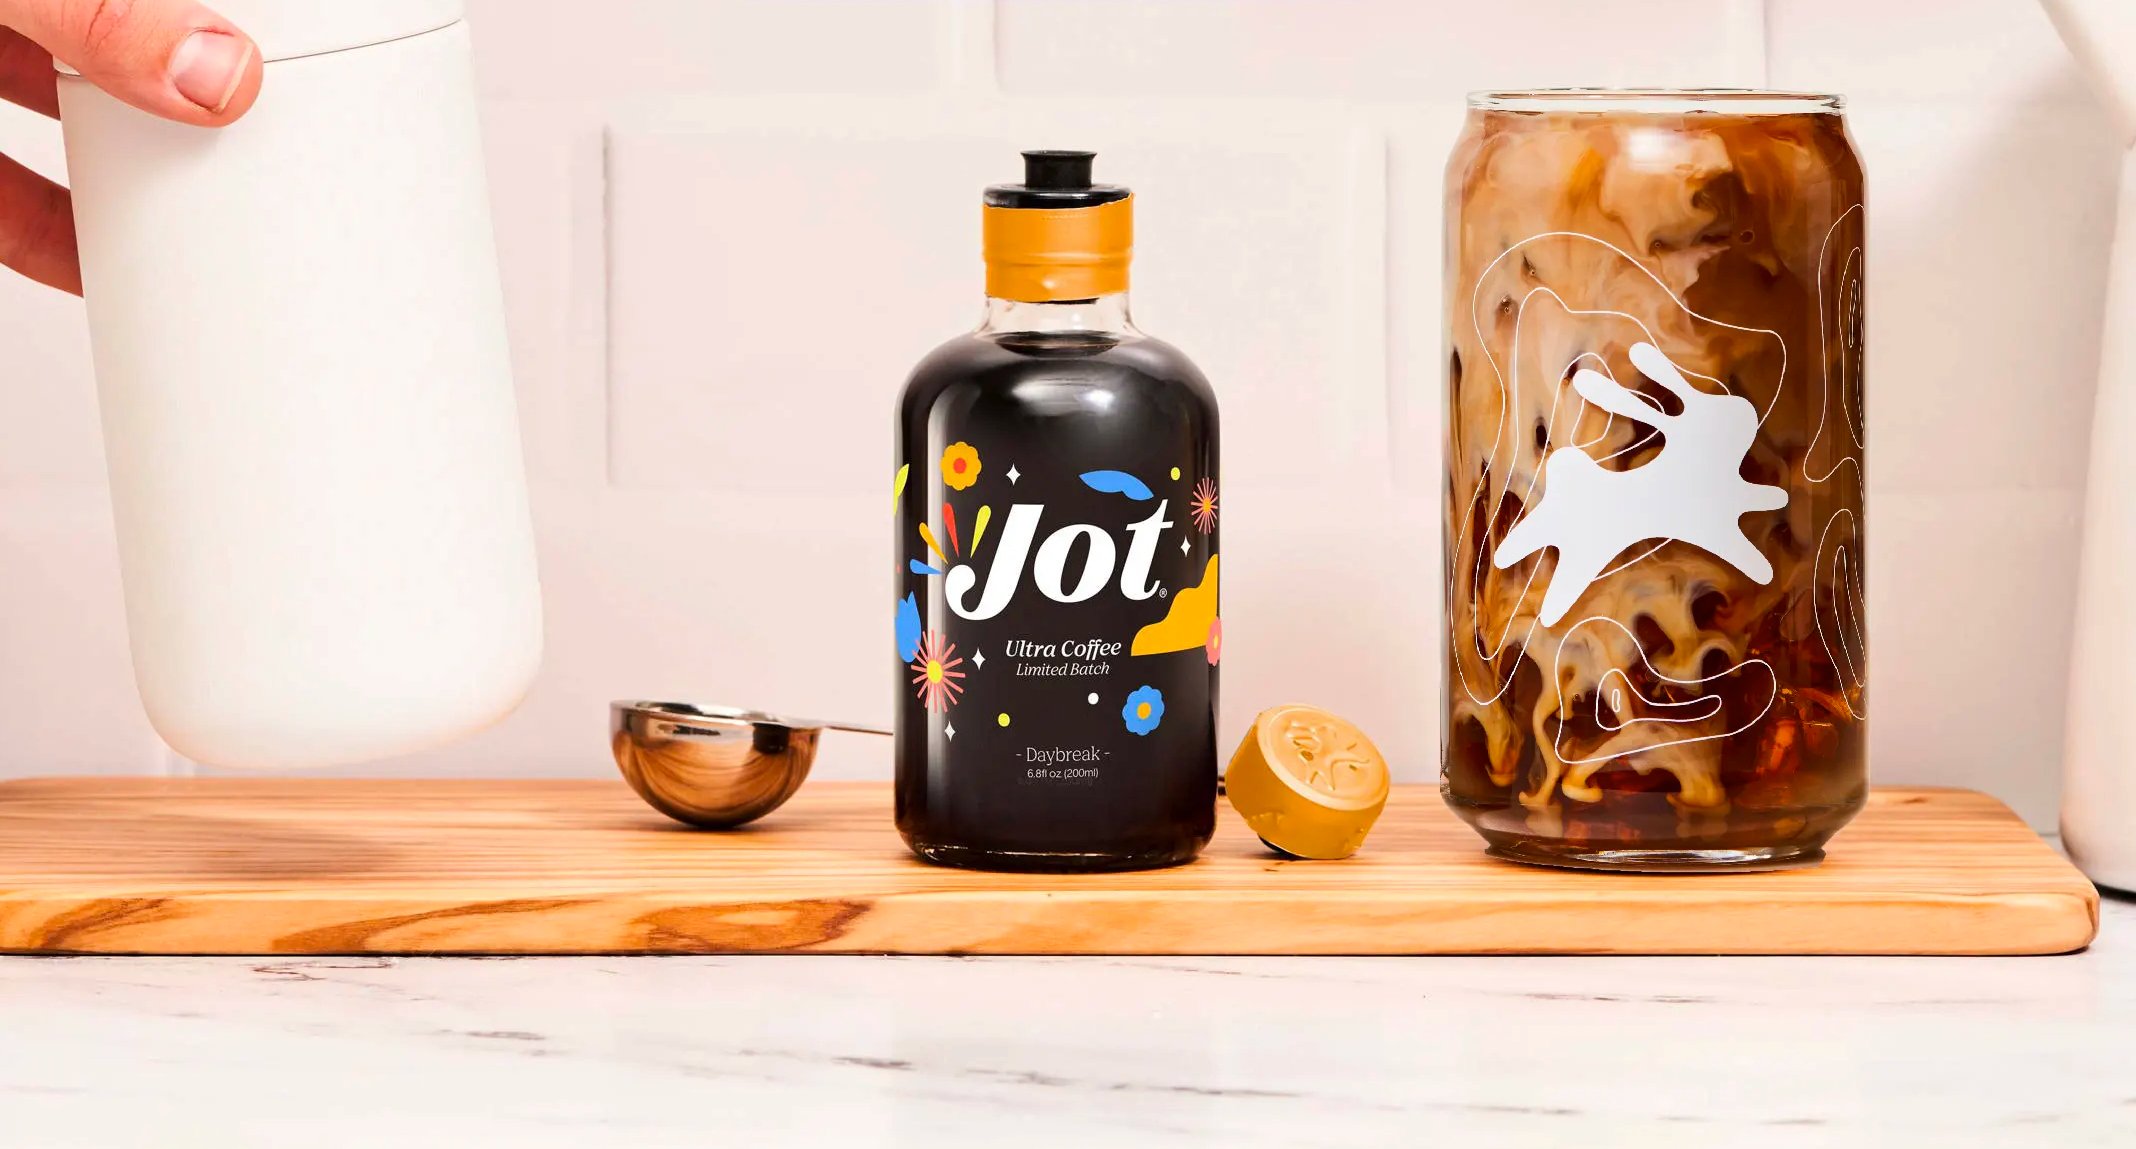 Jot Coffee Review: Is this Concentrate Worth the Buzz?